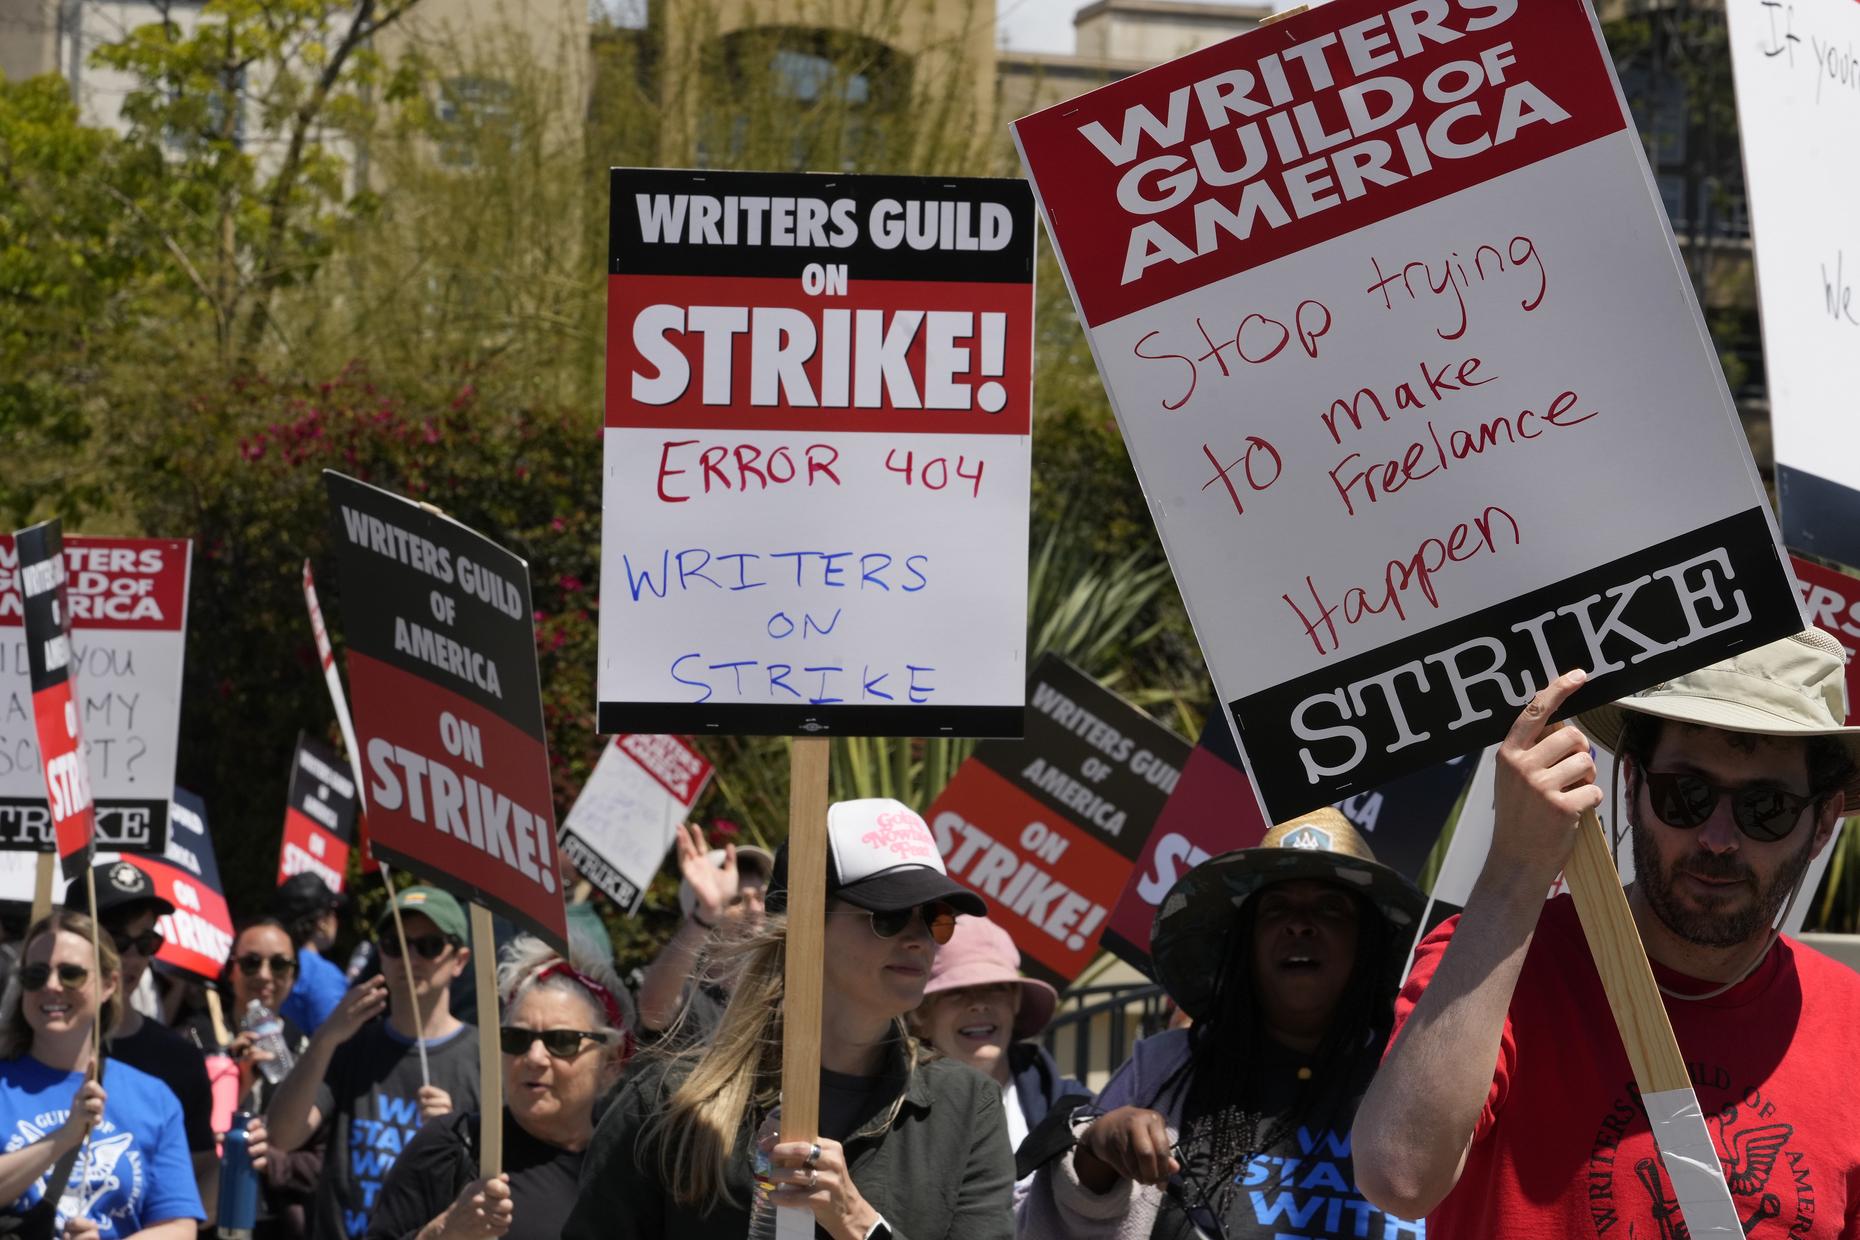 debunking-myths-about-the-writers-strike-on-the-media-wnyc-studios